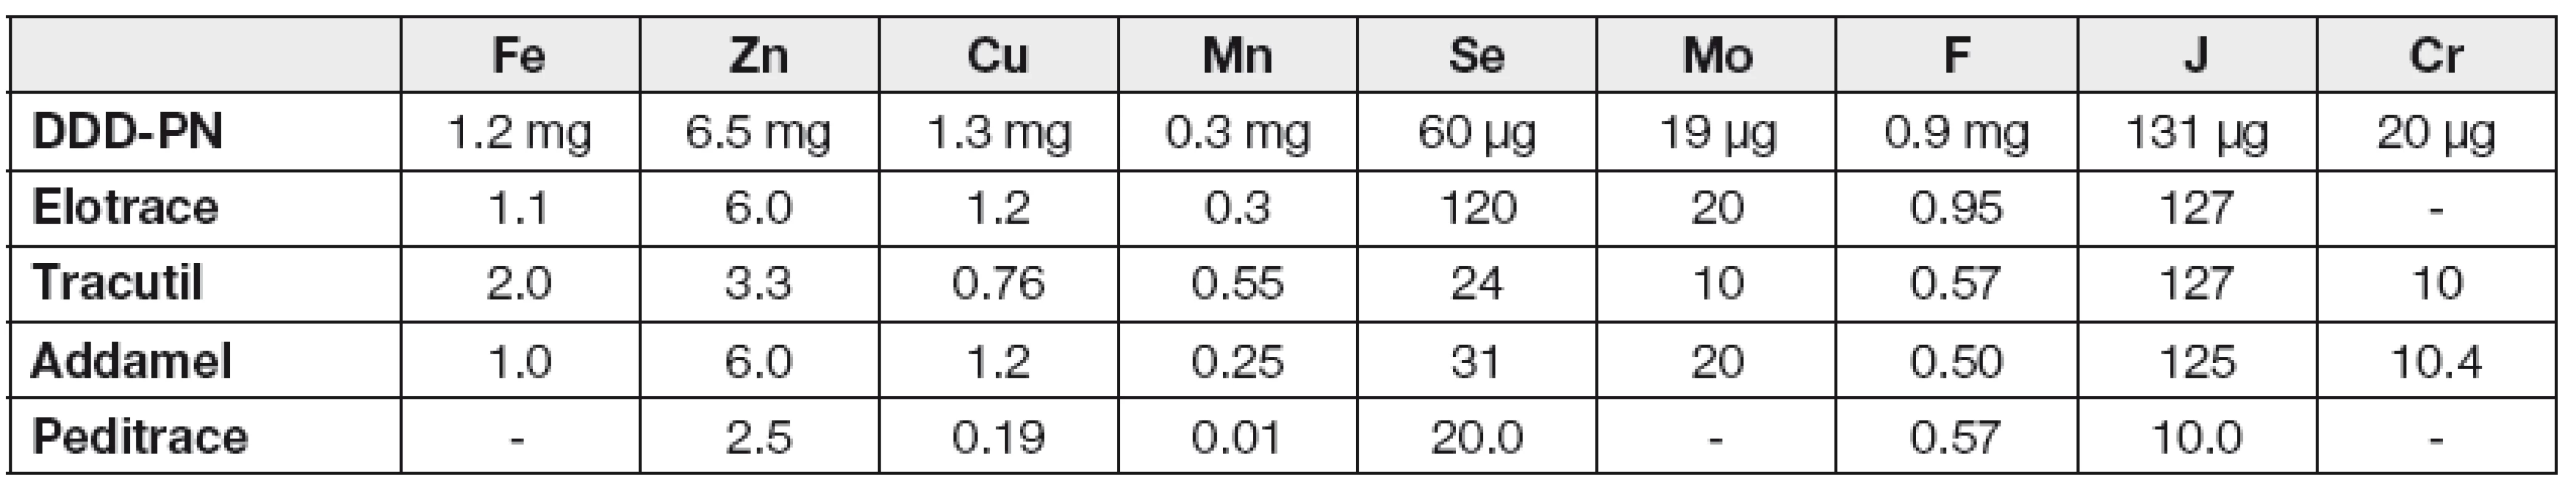 Trace elements present in commercially produced preparations (in one ampoule) and recommended daily doses for pareneteral nutrition (SSD-PN) according to Shenbkin [4]